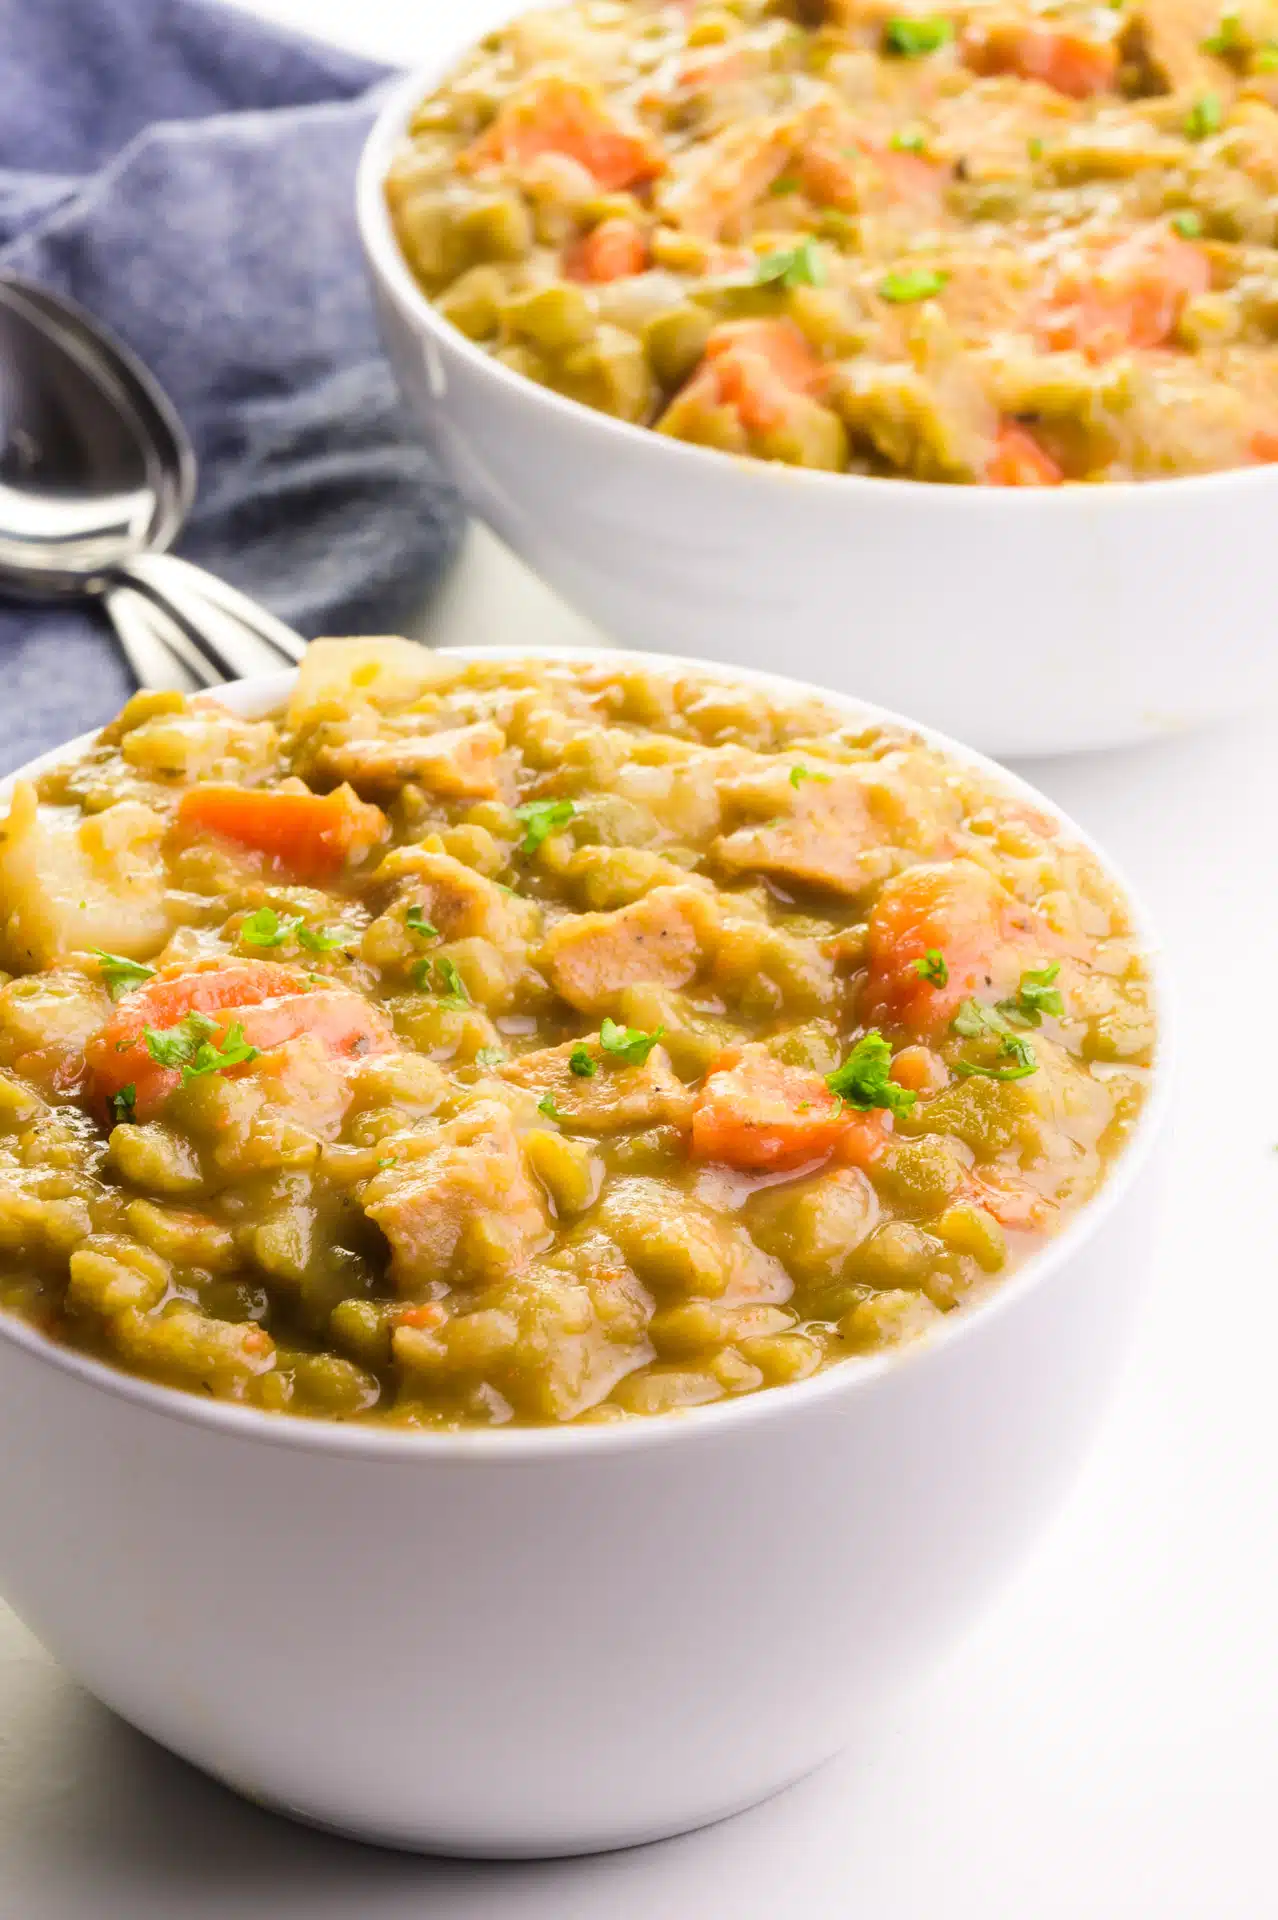 A bowl of vegan split pea soup sits in front of a kitchen towel and a second bowl of the soup.